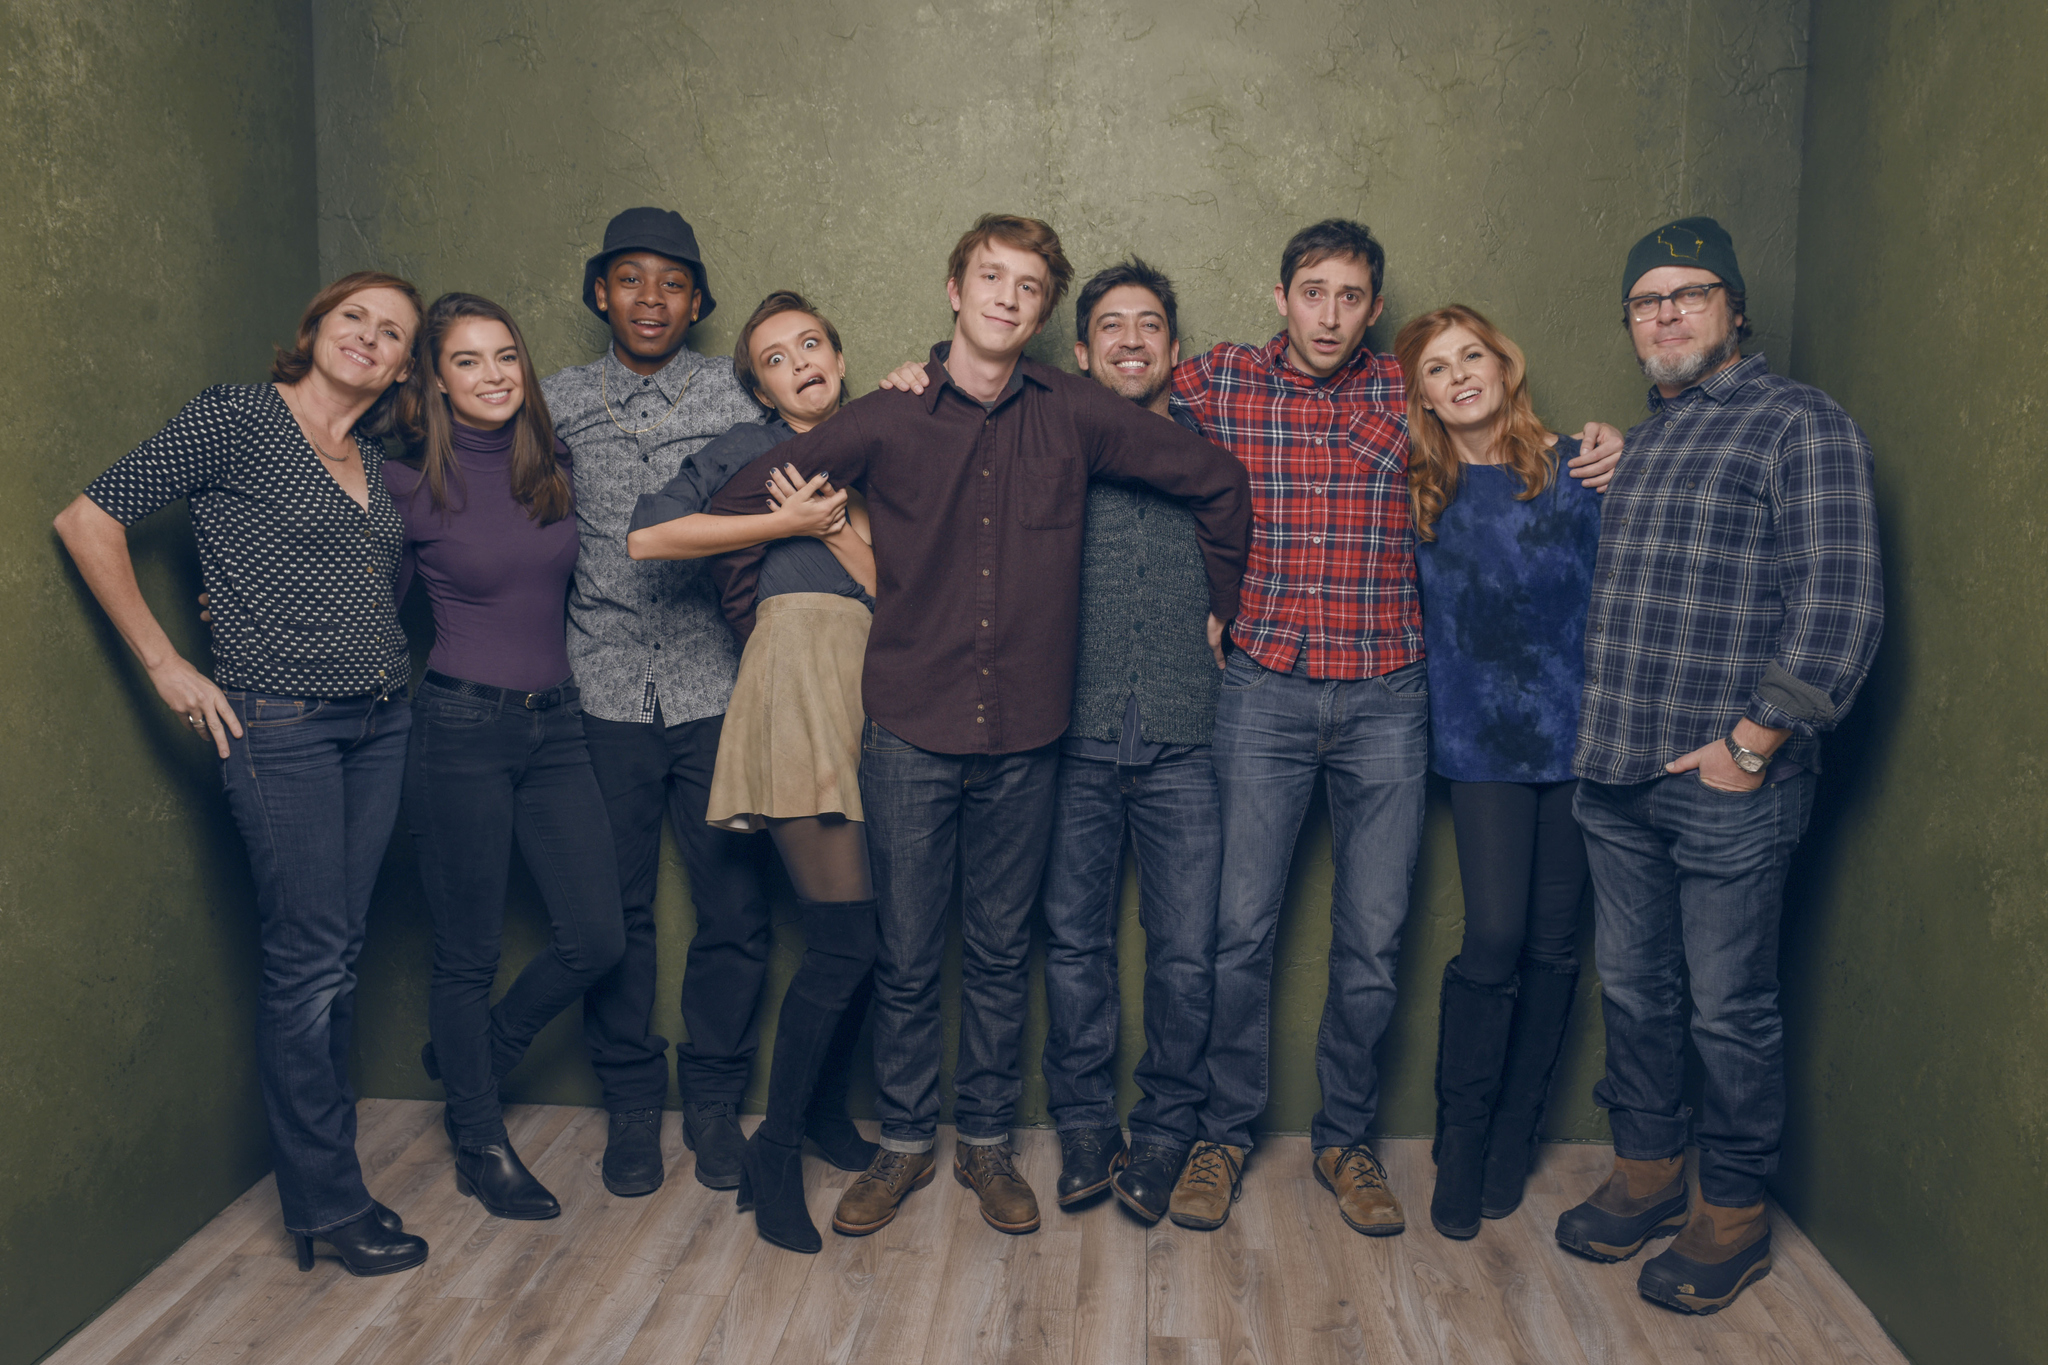 Alfonso Gomez-Rejon, Connie Britton, Nick Offerman, Molly Shannon, Thomas Mann, Katherine Hughes, Olivia Cooke, Jesse Andrews and RJ Cyler